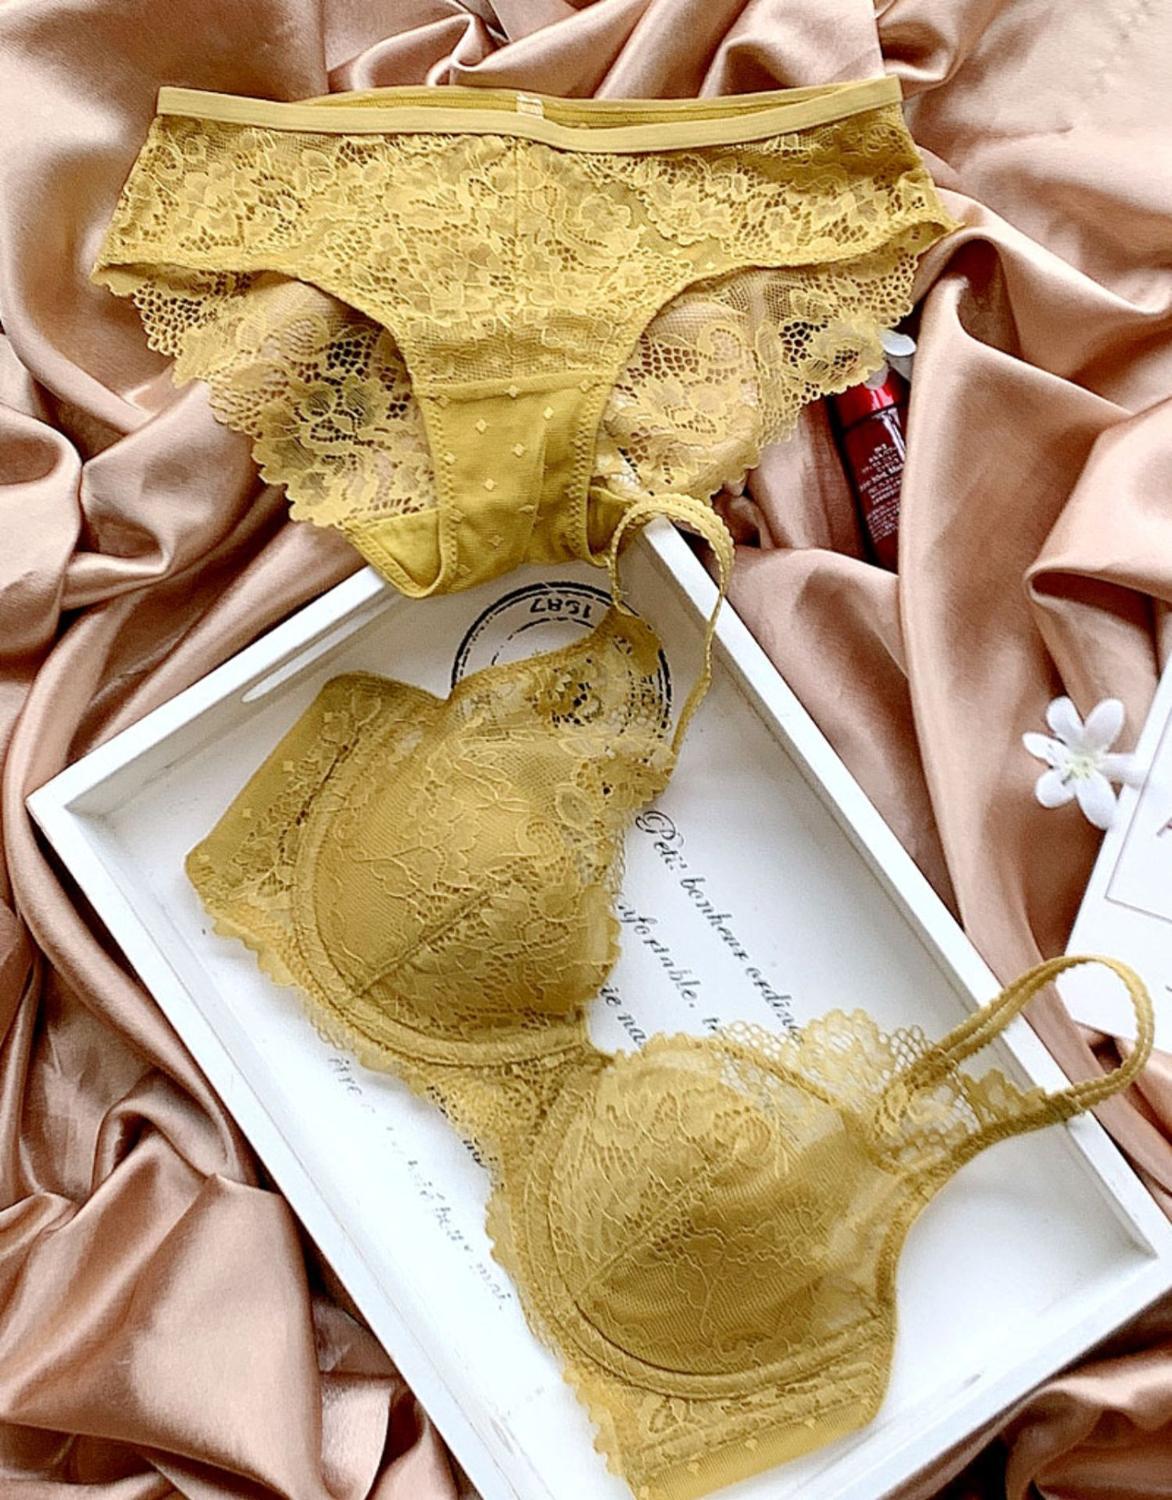 HONVIEY New Lingerie Set Full Lace Yellow Underwear Thin Comfortable Bra Set Gathered Beautiful Embroidered Bra & Brief Sets